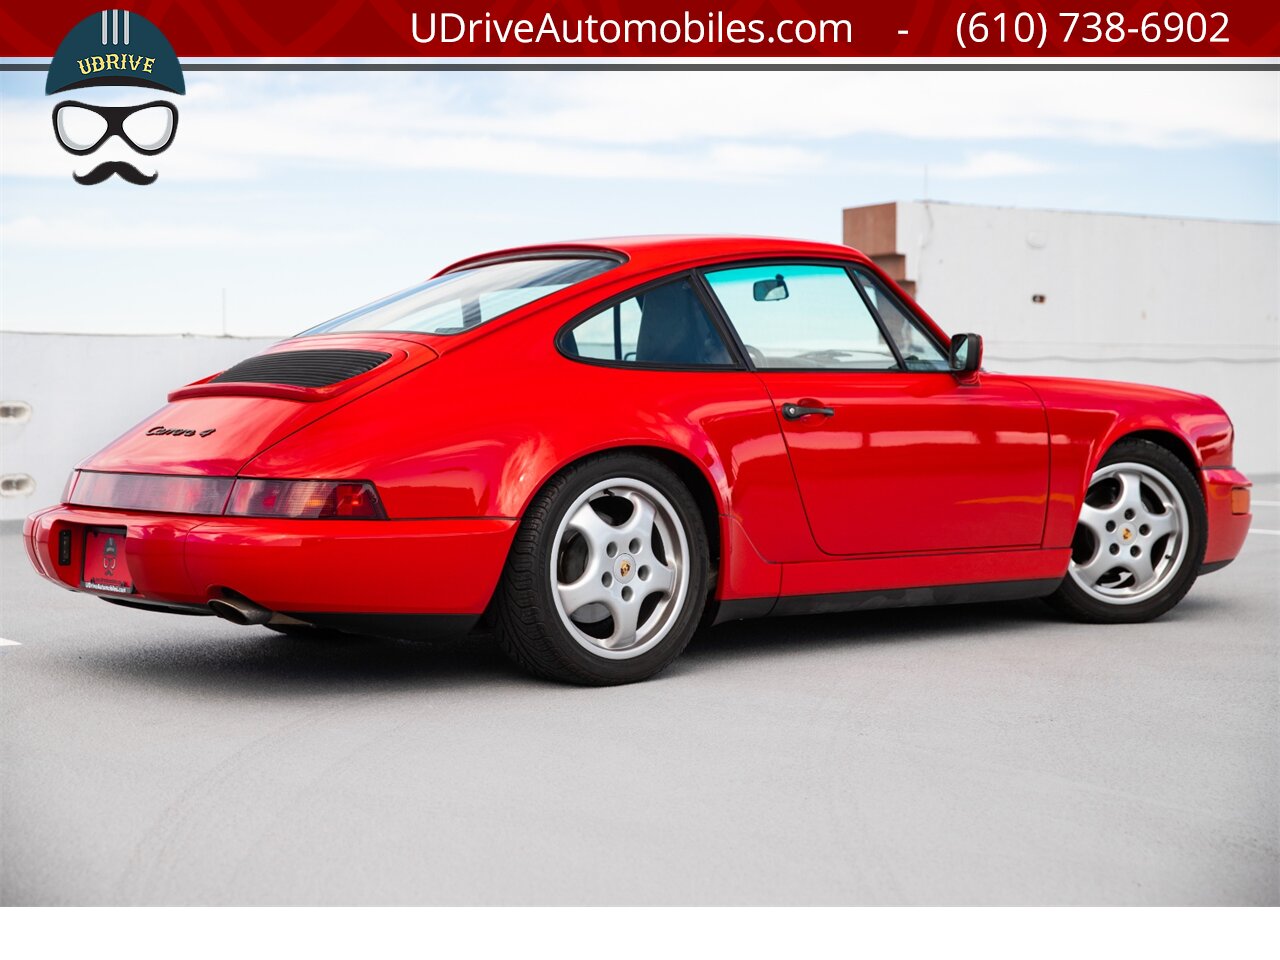 1989 Porsche 911 Carrera 4 964 C4 5 Speed Engine Rebuild  $40k in Service History Cup 1 Wheels - Photo 2 - West Chester, PA 19382